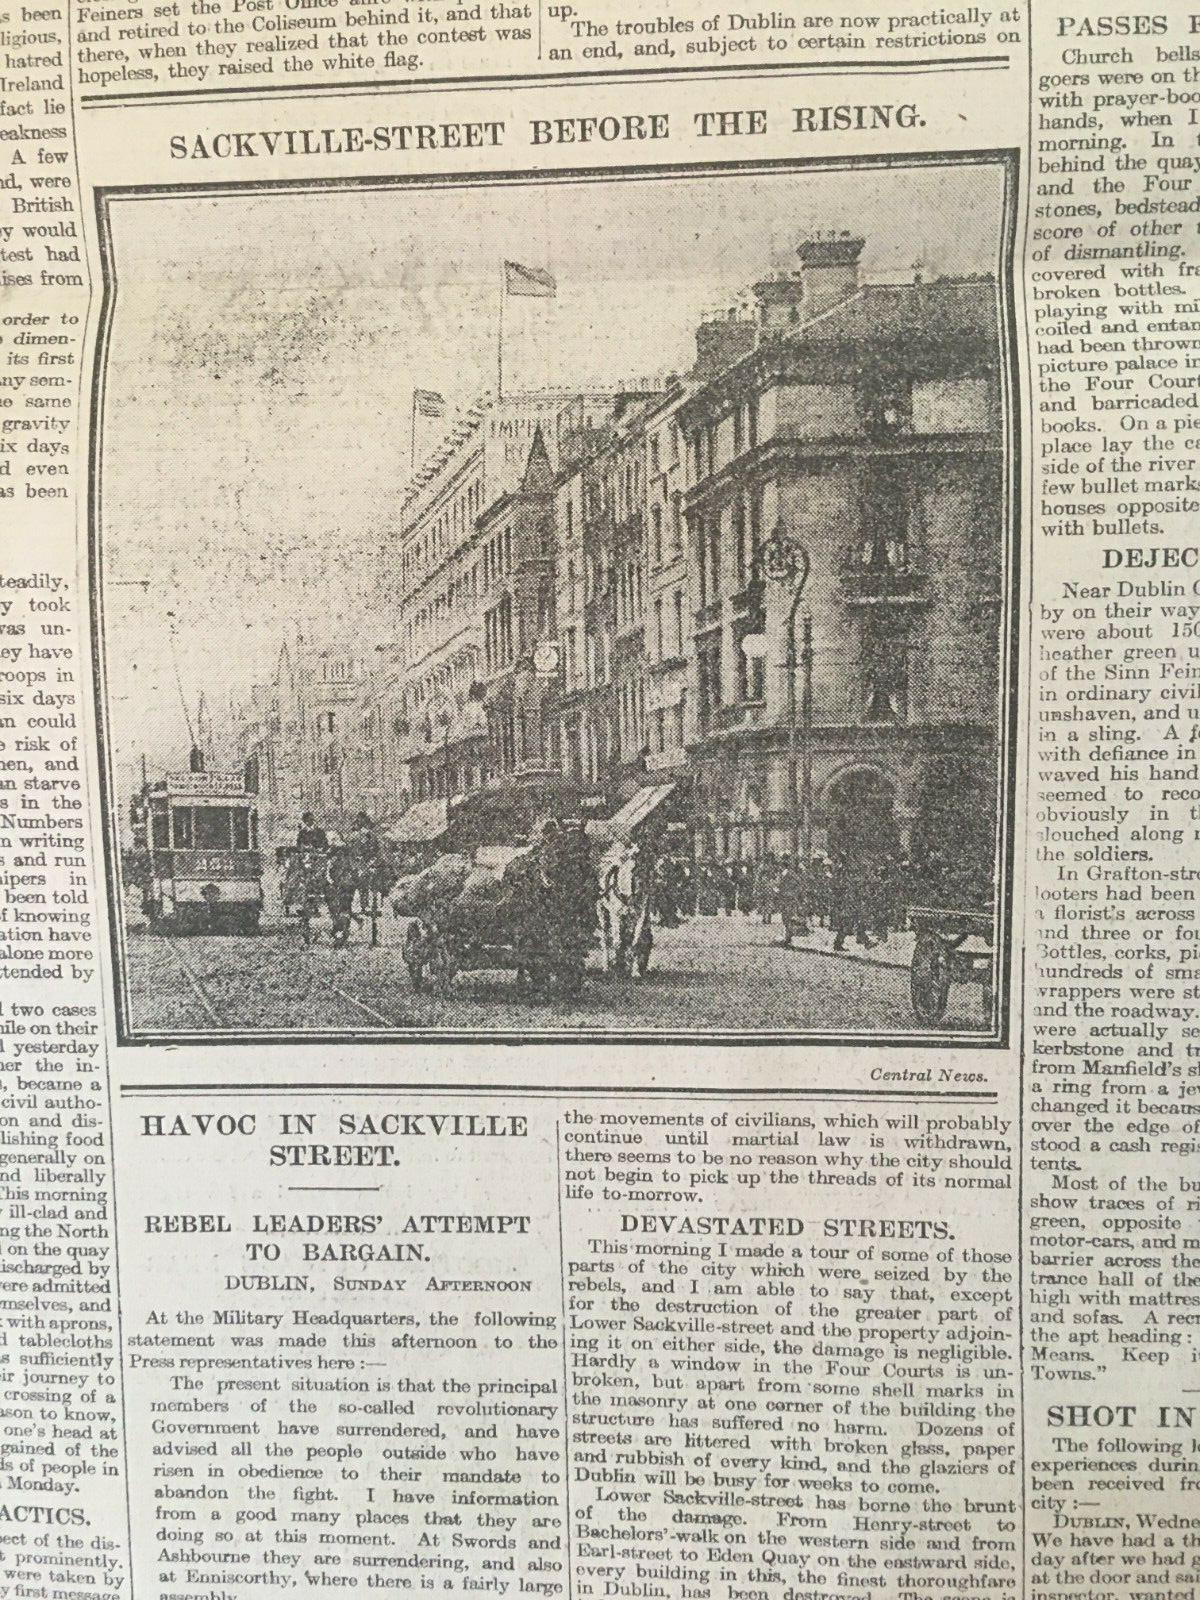 Easter Rising 1916 Original Complate Newspaper 2nd May Images & Reports - Image 3 of 12